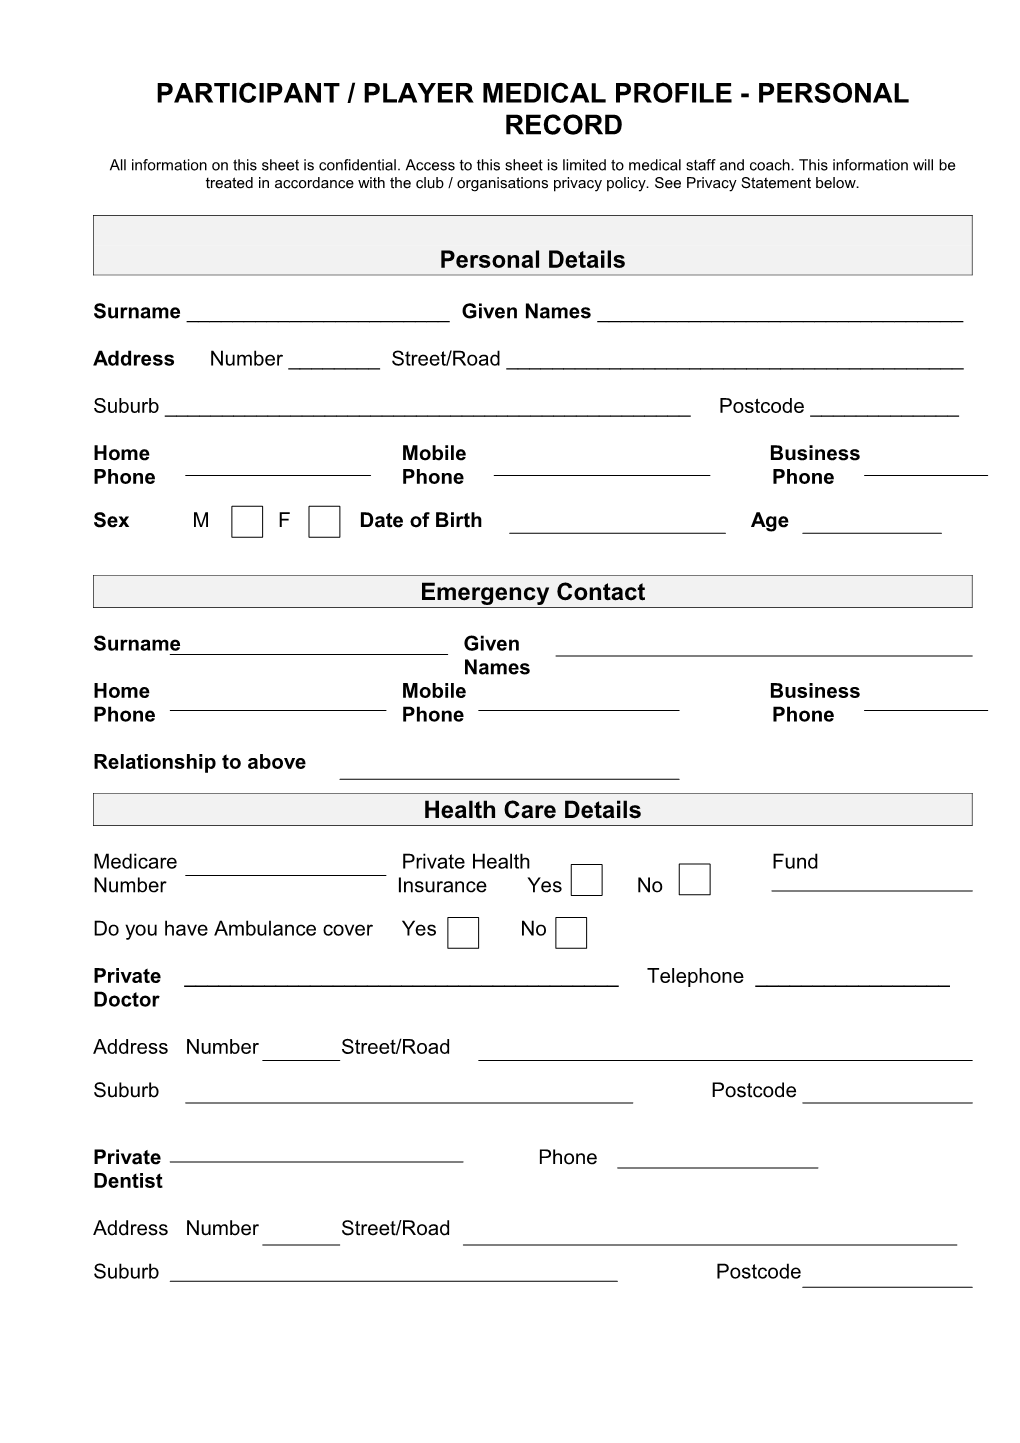 Participant/Player Medical Profile Personal Record